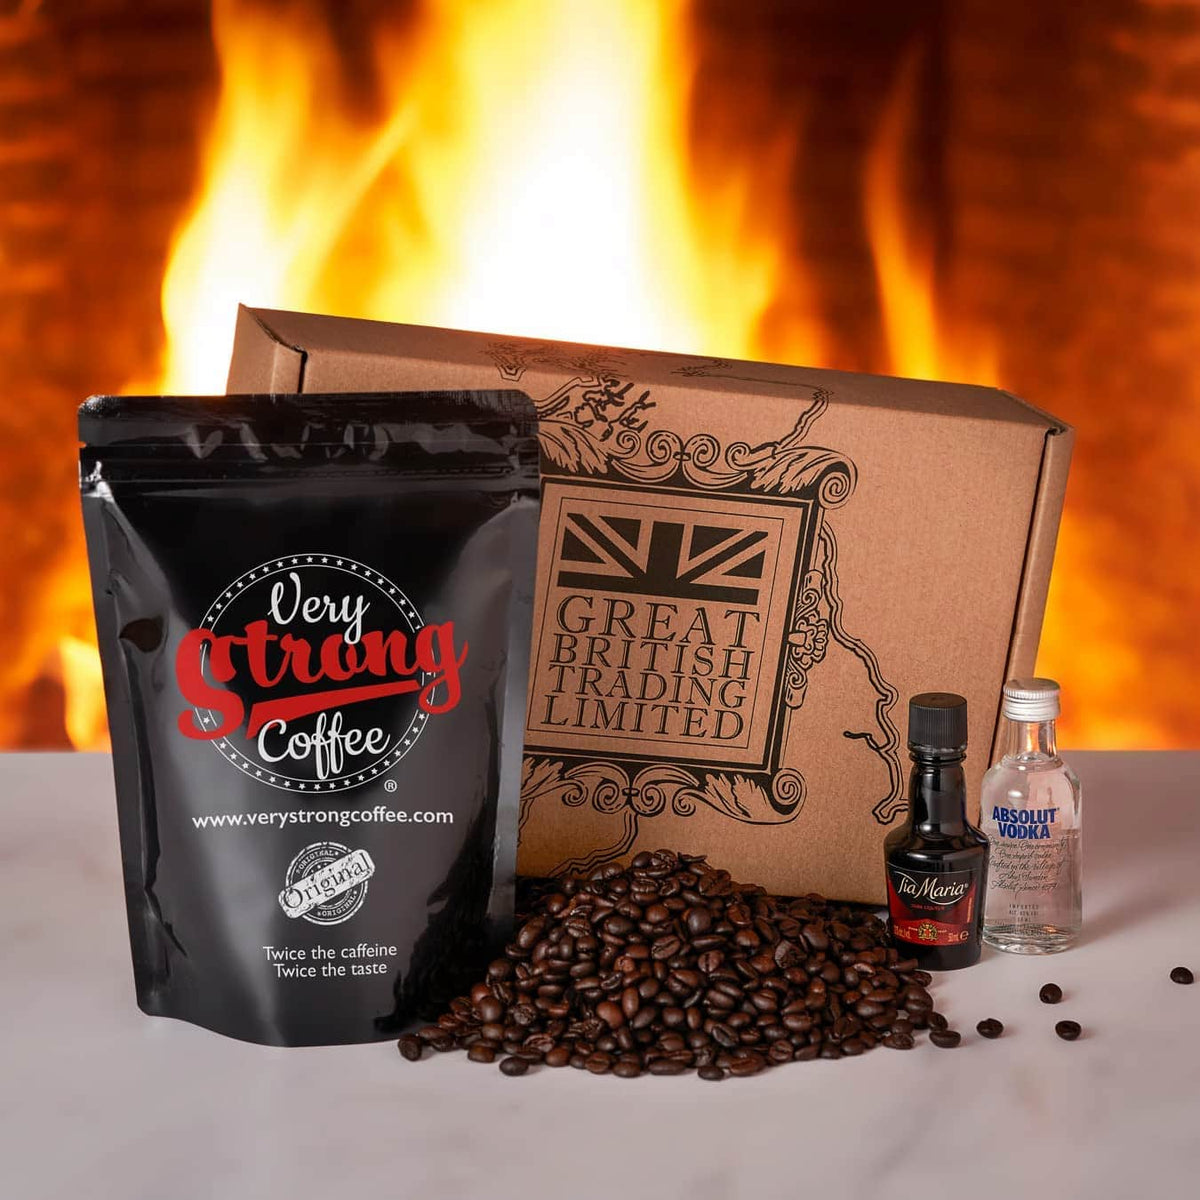 ESPRESSO MARTINI Kit Gift Set | VERY STRONG COFFEE tia maria and absolute vodka